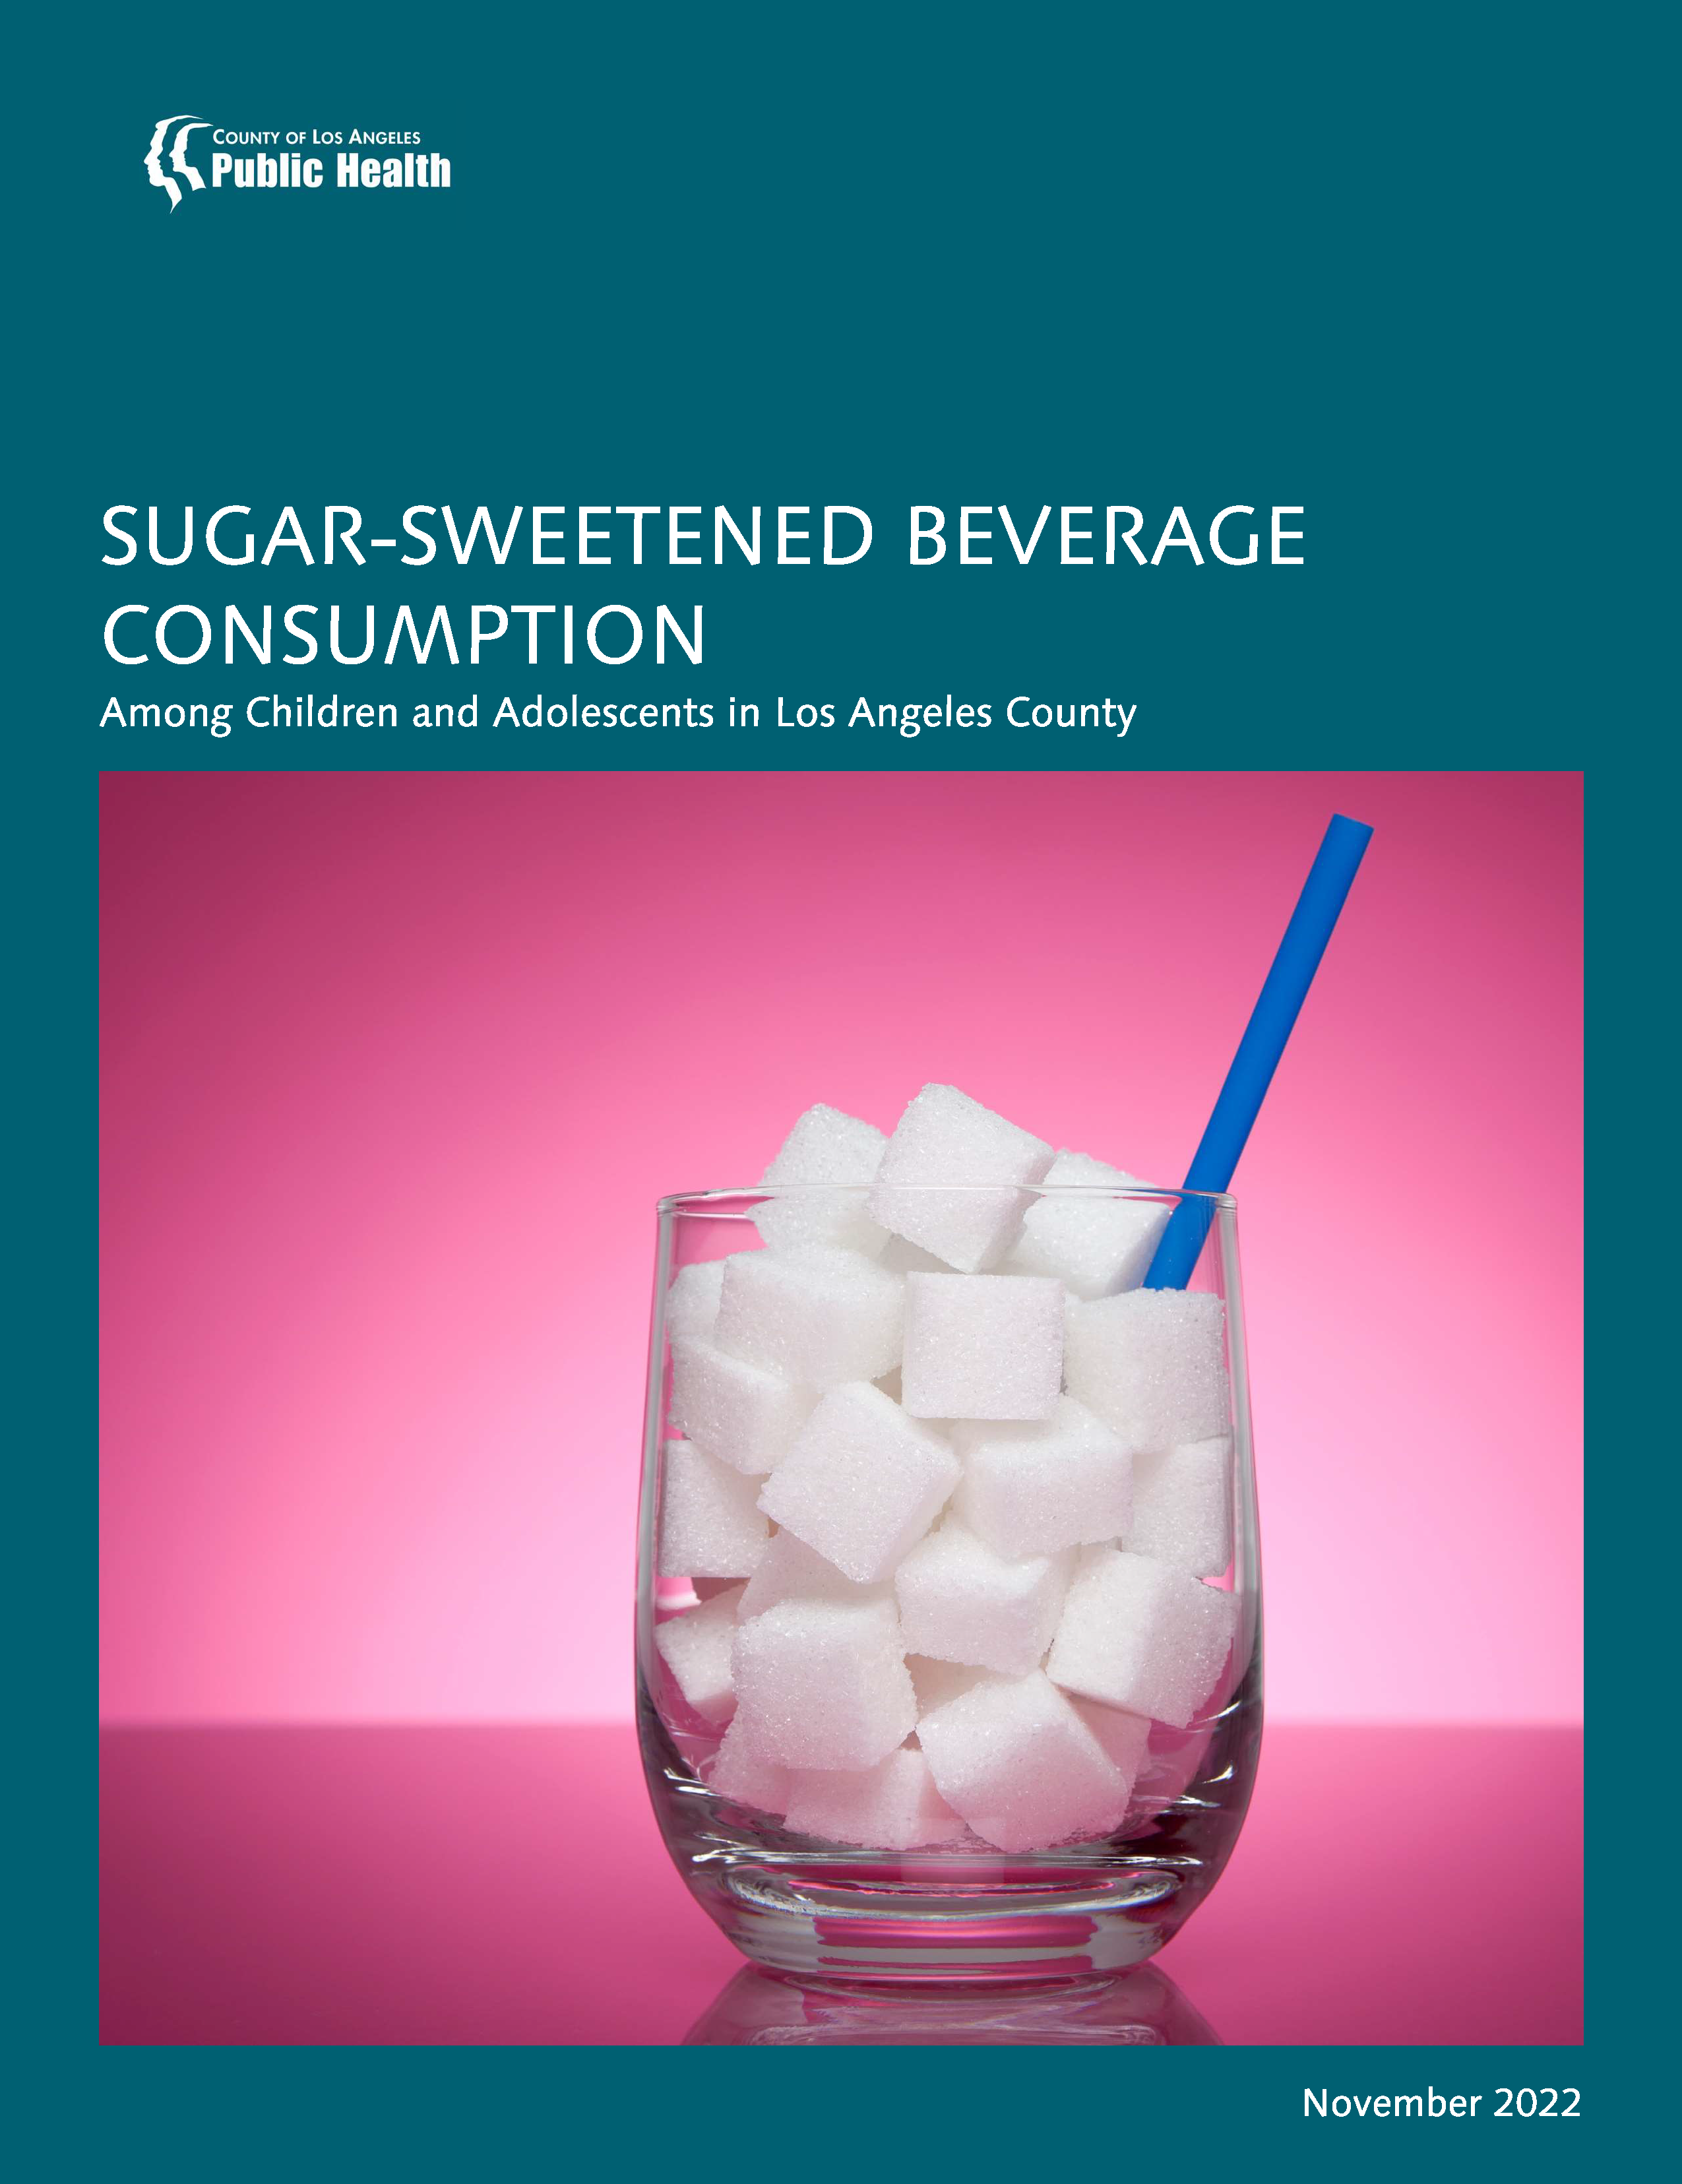 Public Health Releases Report Showing Sugar-Sweetened Beverages Pose Ongoing Concern to Health of Youth in Los Angeles County